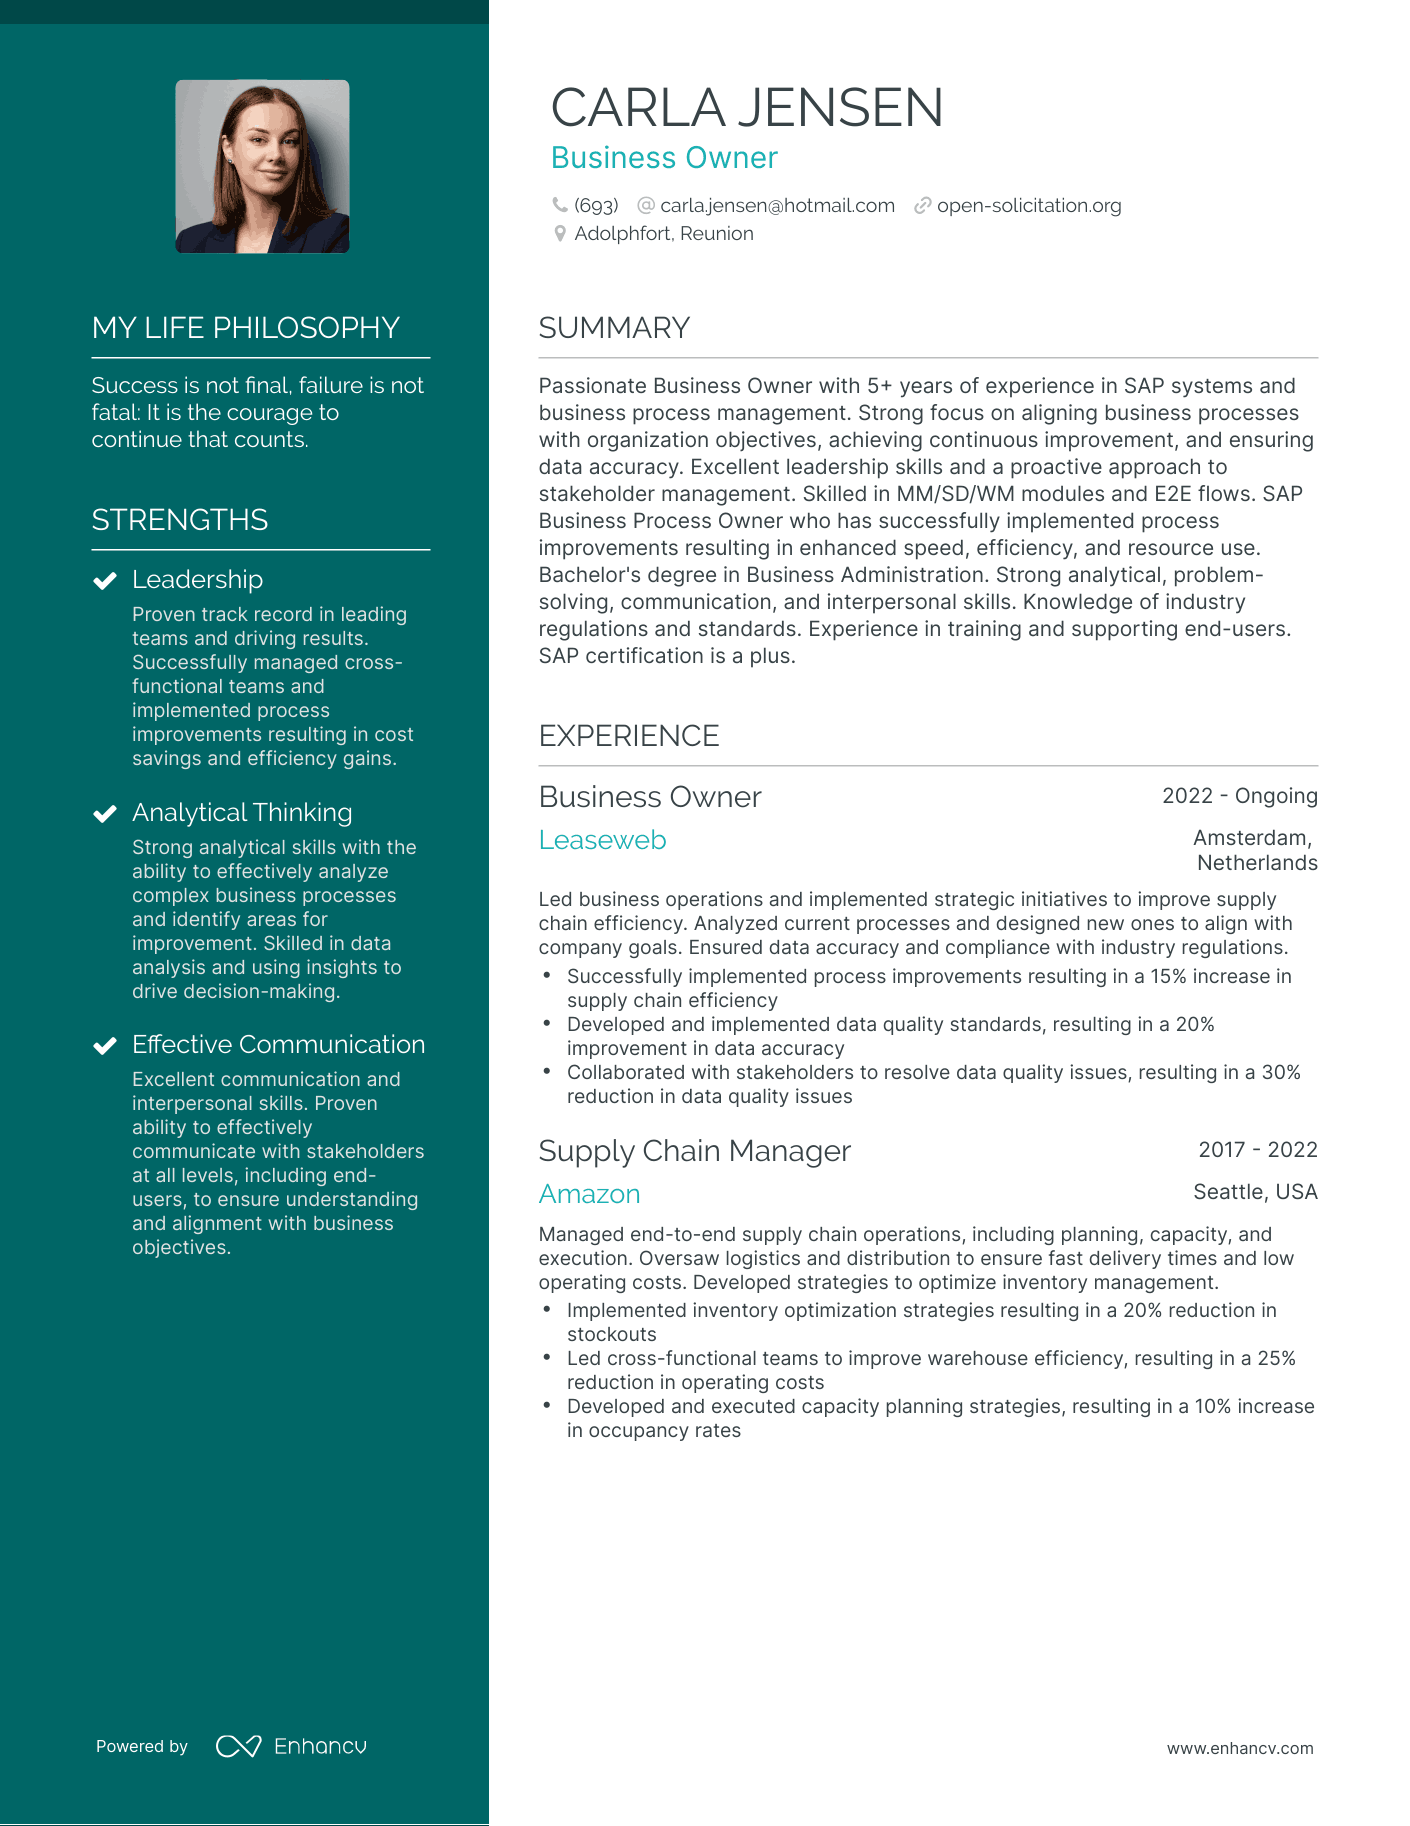 Business Owner resume example